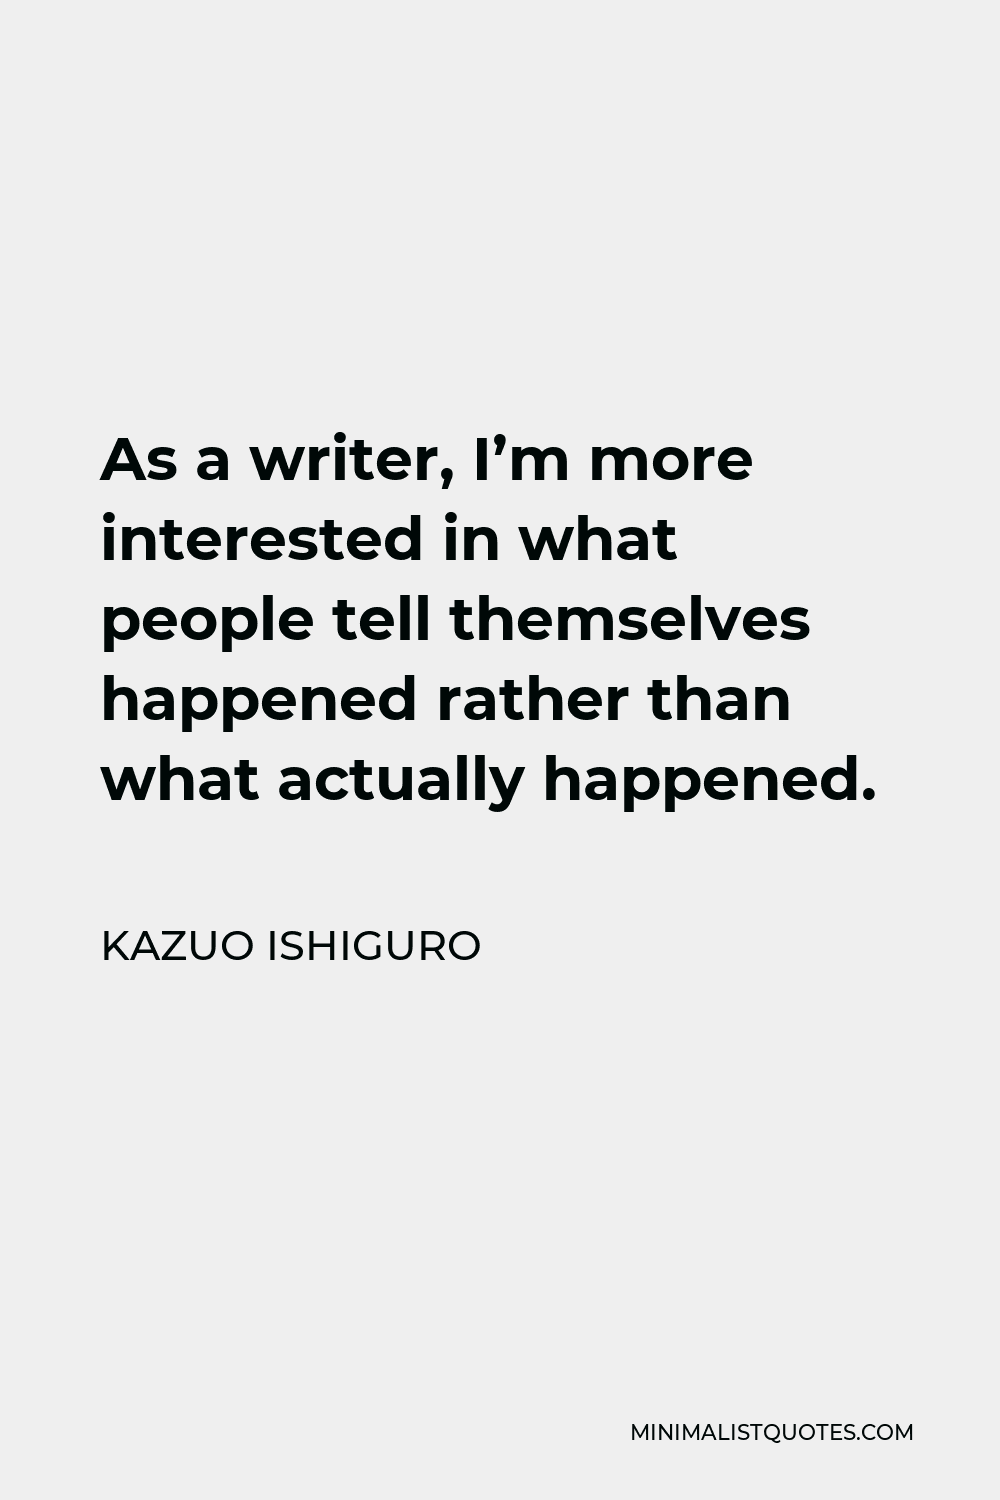 Kazuo Ishiguro Quote - As a writer, I’m more interested in what people tell themselves happened rather than what actually happened.